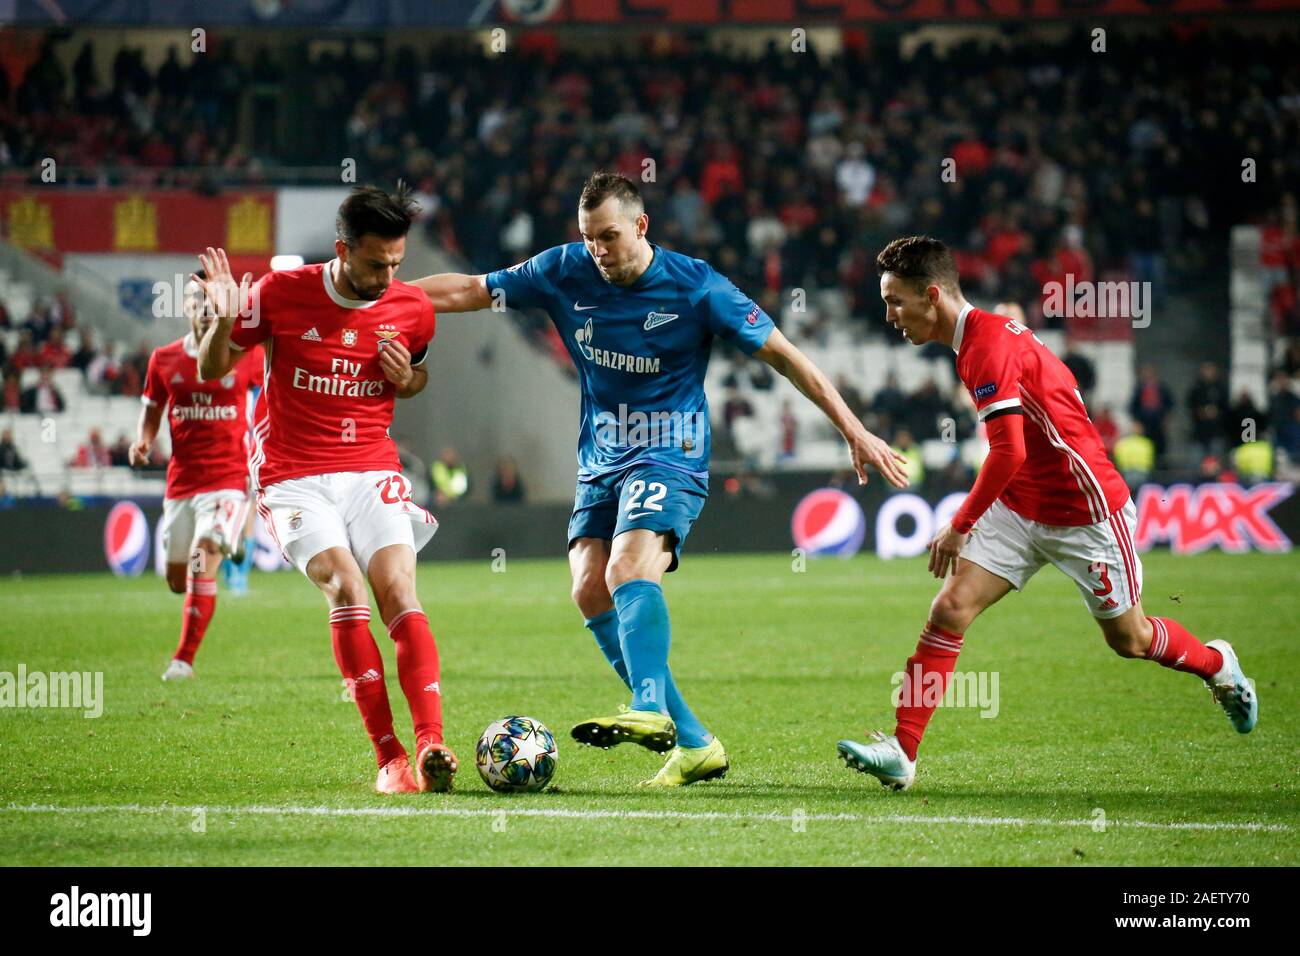 Saint Petersburg, Russia. 11th Dec, 2019. Andreas Samaris (L), Alex Grimaldo (R) of Benfica and Artem Dzyuba (C) of Zenit are seen in action during the UEFA Champions League group G match between SL Benfica Lisbon and Zenit at Gazprom Arena in St. Petersburg.(Final score; SL Benfica Lisbon 3:0 Zenit) Credit: SOPA Images Limited/Alamy Live News Stock Photo